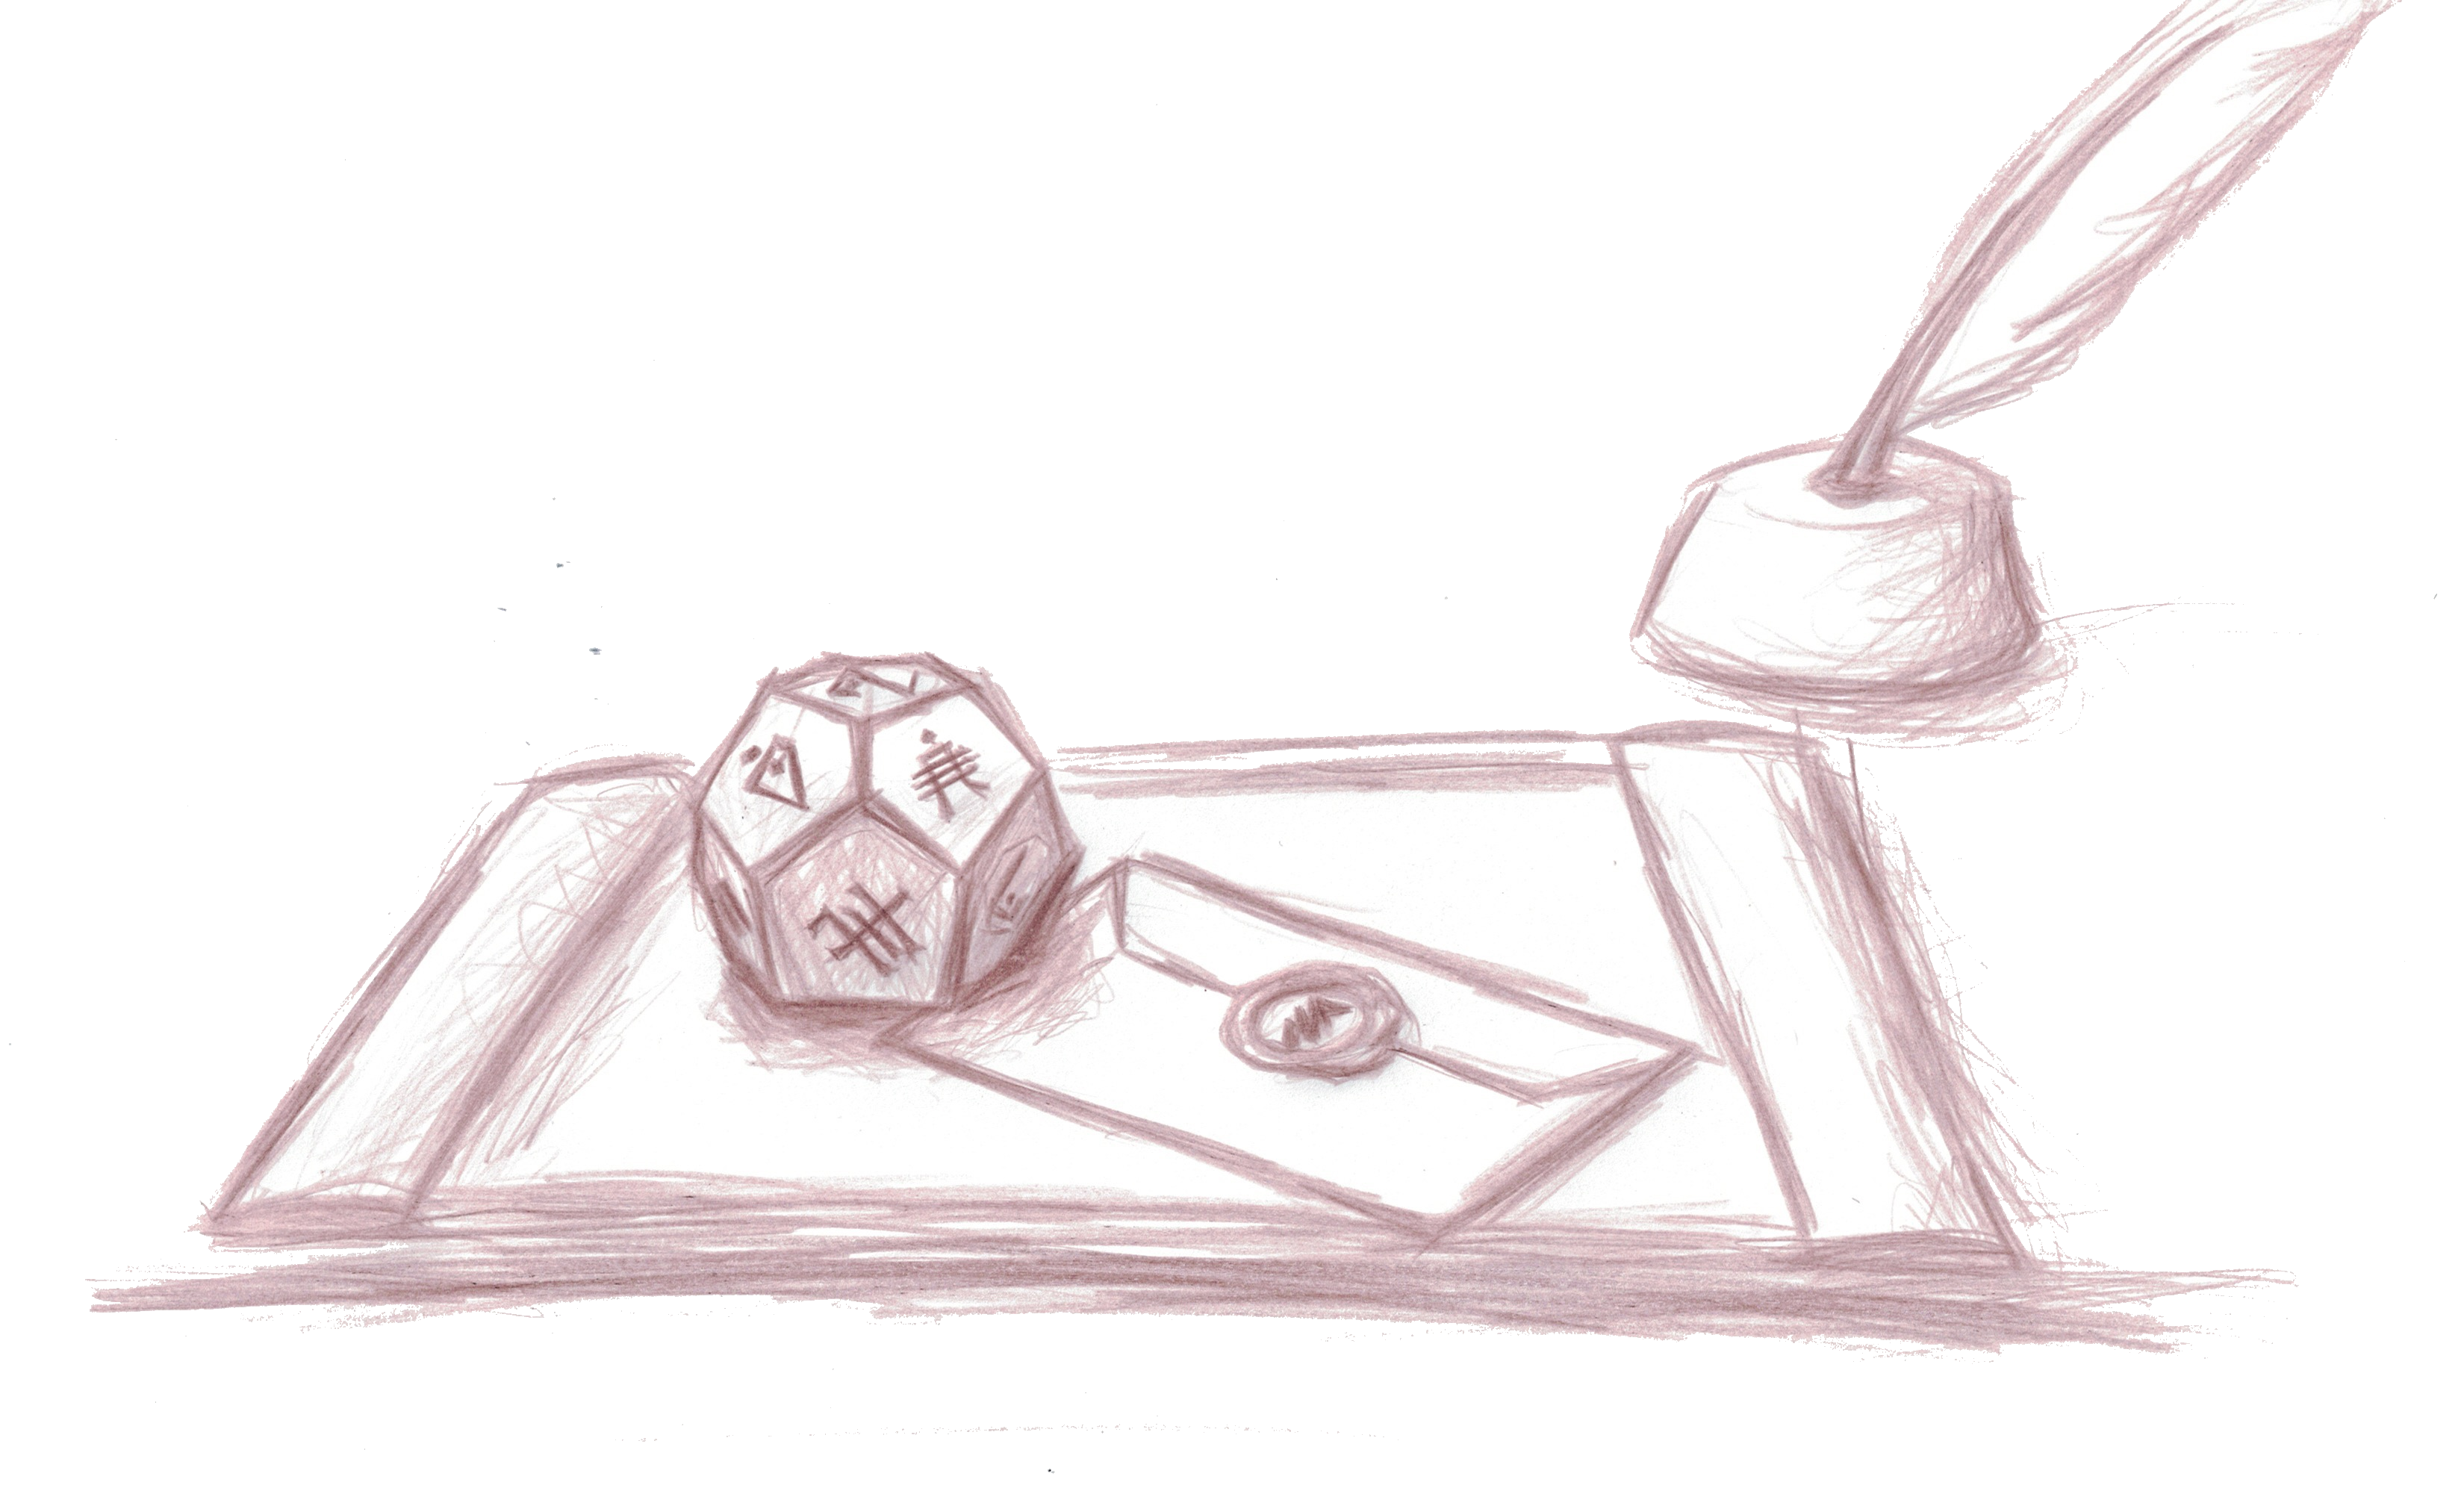 A desk with an inkwell and quill, an envelope sealed with the mark of a lightning bolt, and a dodecahedron with strange symbols on it.